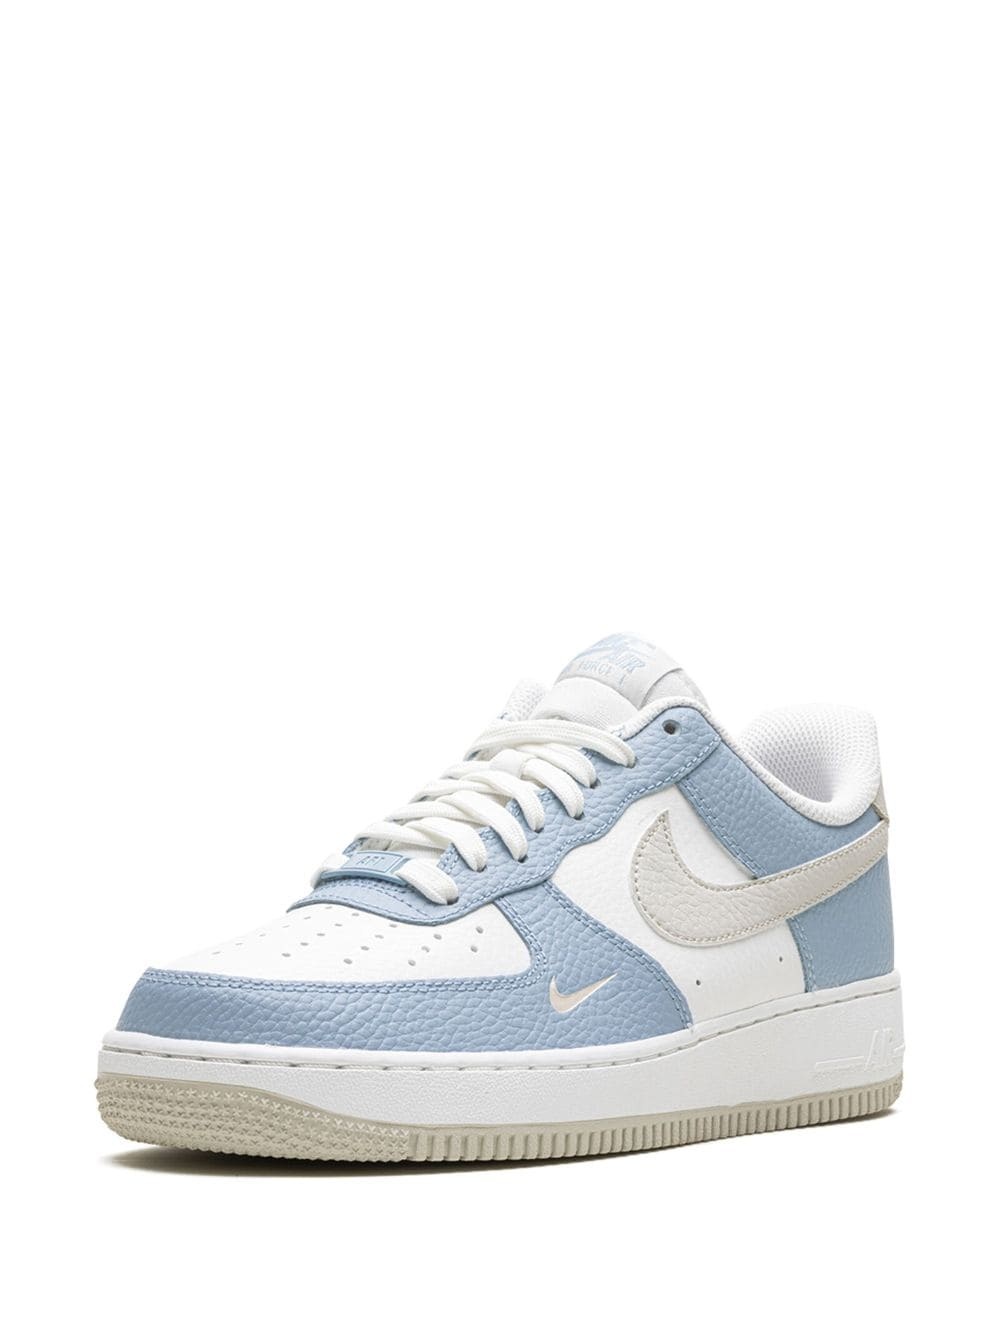 Air Force '07 "Baby Blue" sneakers - 5